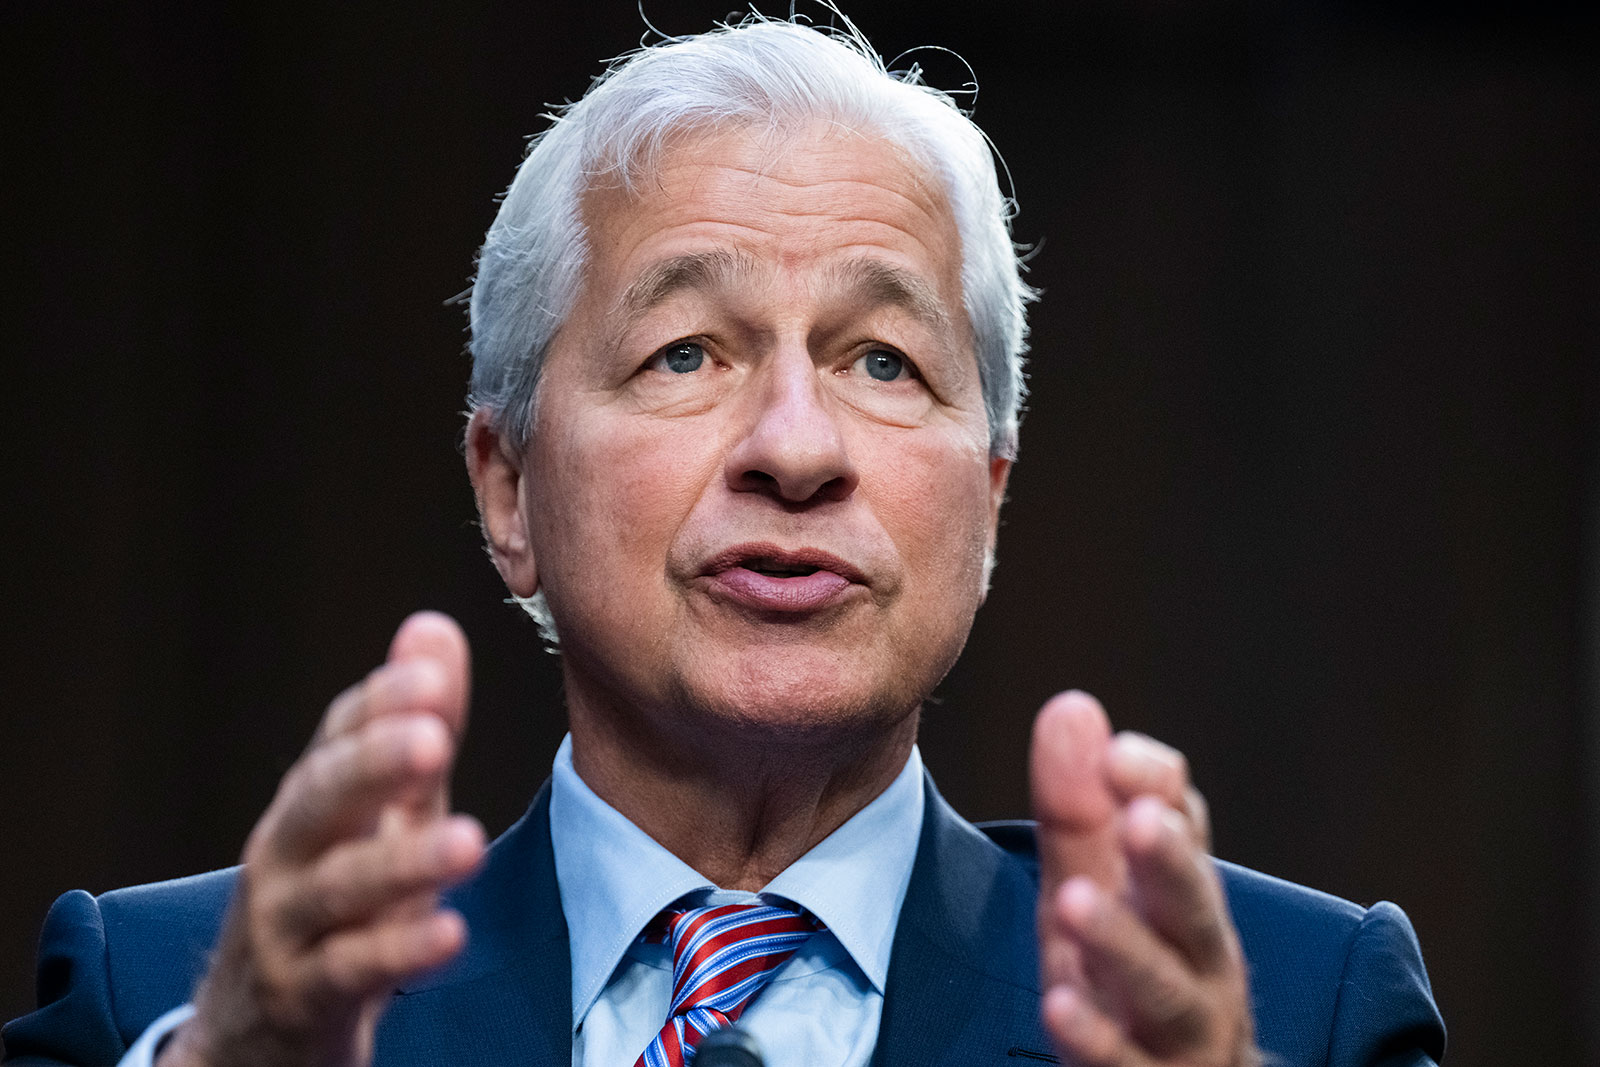 Jamie Dimon, CEO of JPMorgan Chase, testifies during the Senate Banking, Housing, and Urban Affairs Committee hearing in 2022.